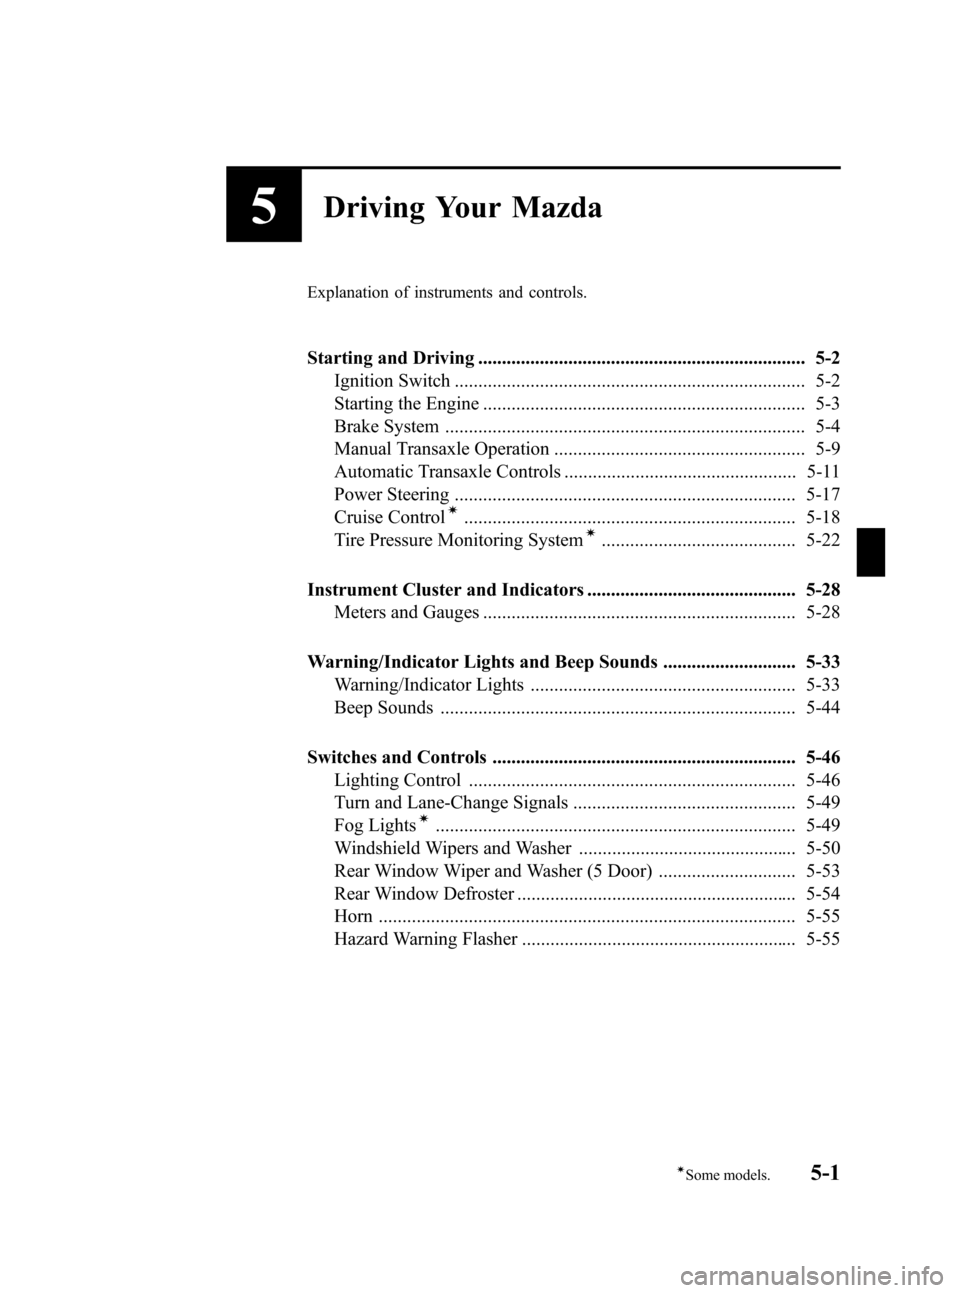 MAZDA MODEL 3 HATCHBACK 2006  Owners Manual (in English) Black plate (115,1)
5Driving Your Mazda
Explanation of instruments and controls.
Starting and Driving ..................................................................... 5-2
Ignition Switch ........